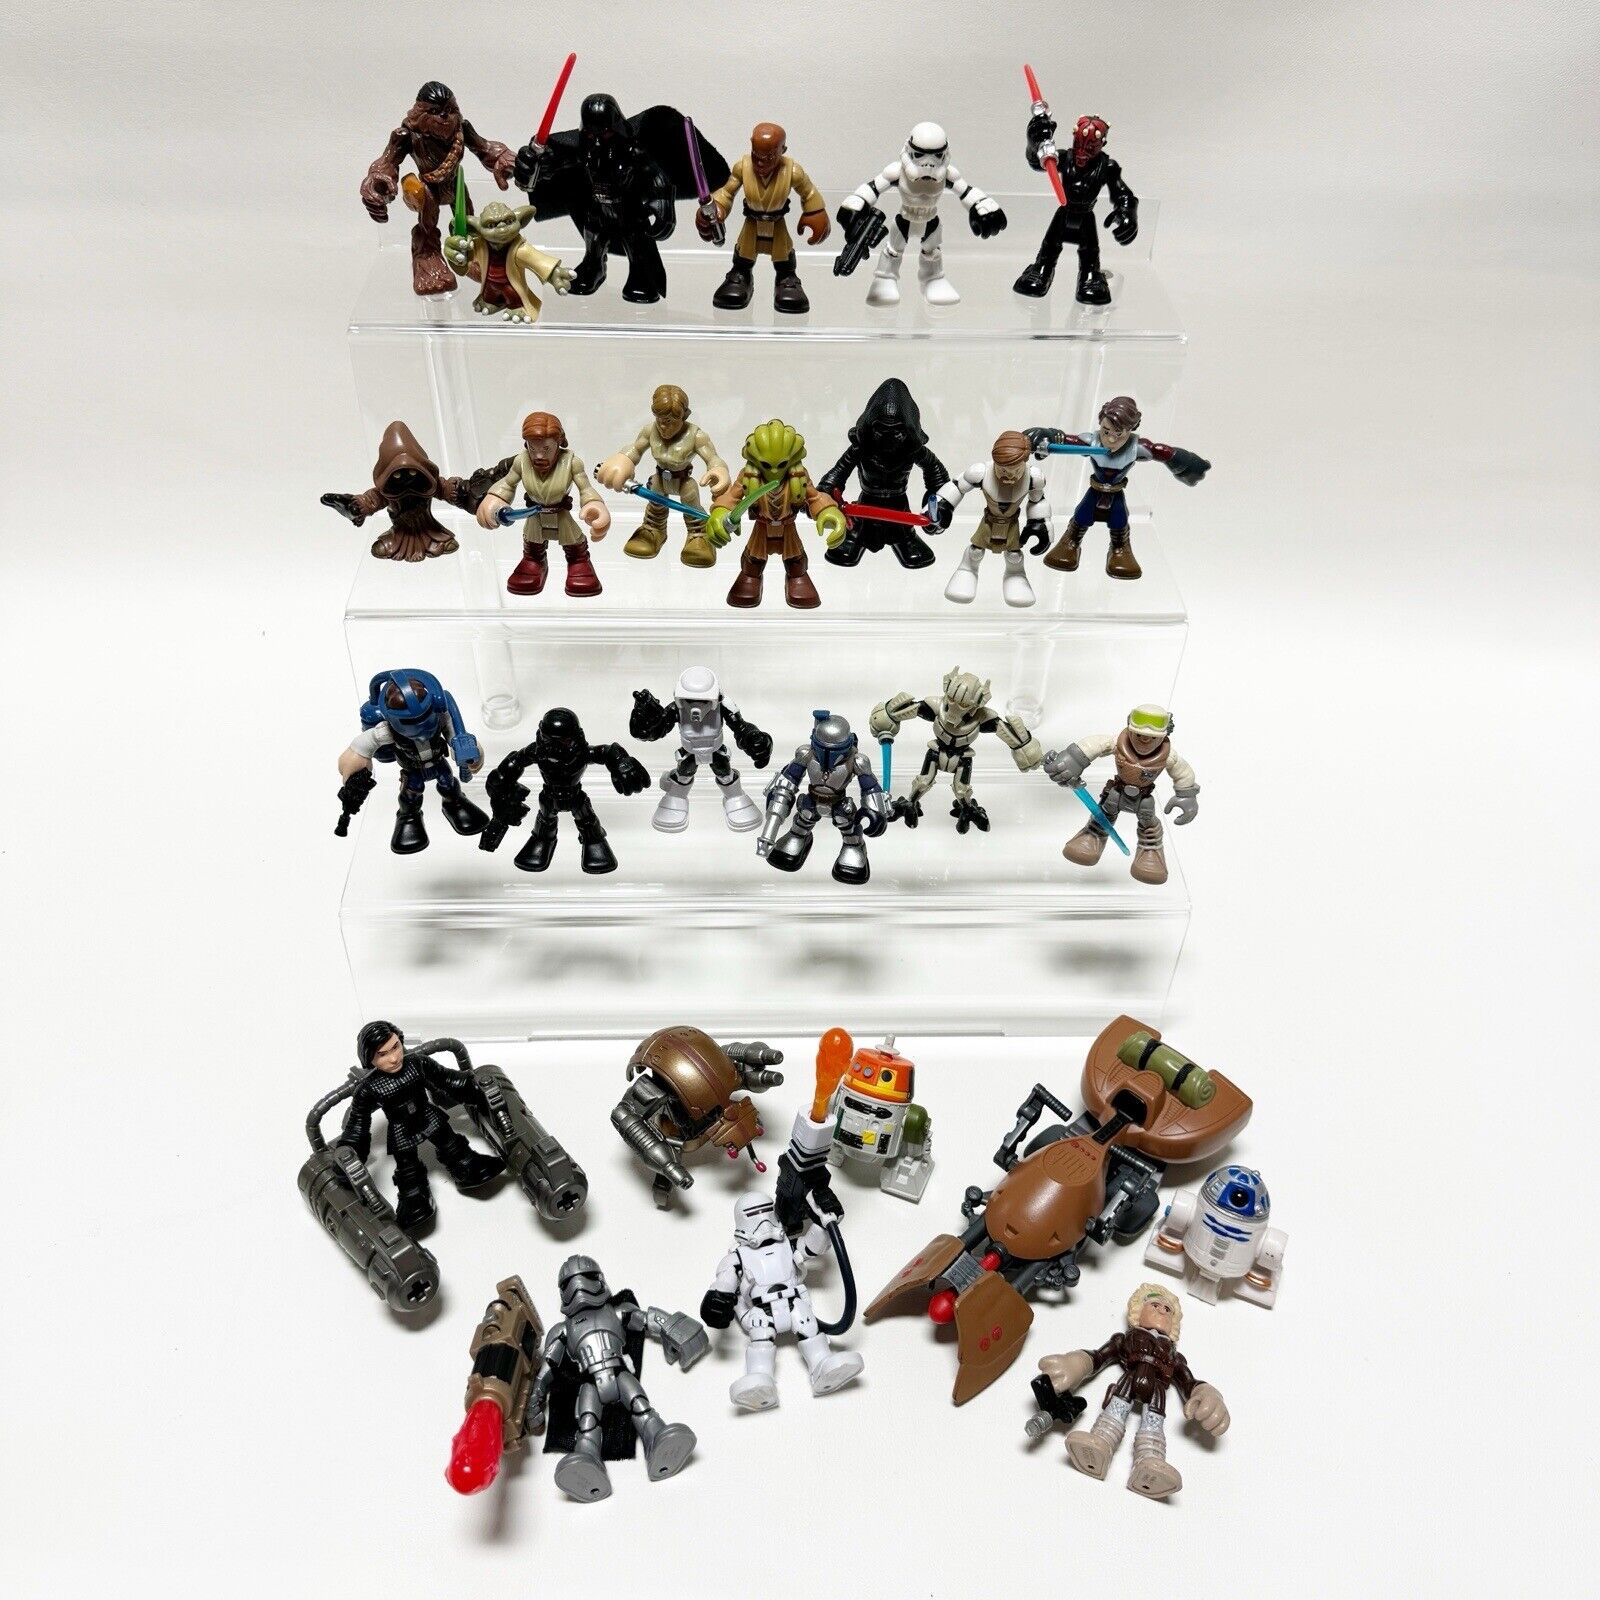 Lot of 25+ Star Wars Galactic Heroes Action Figures Play Set - No Duplicates C2